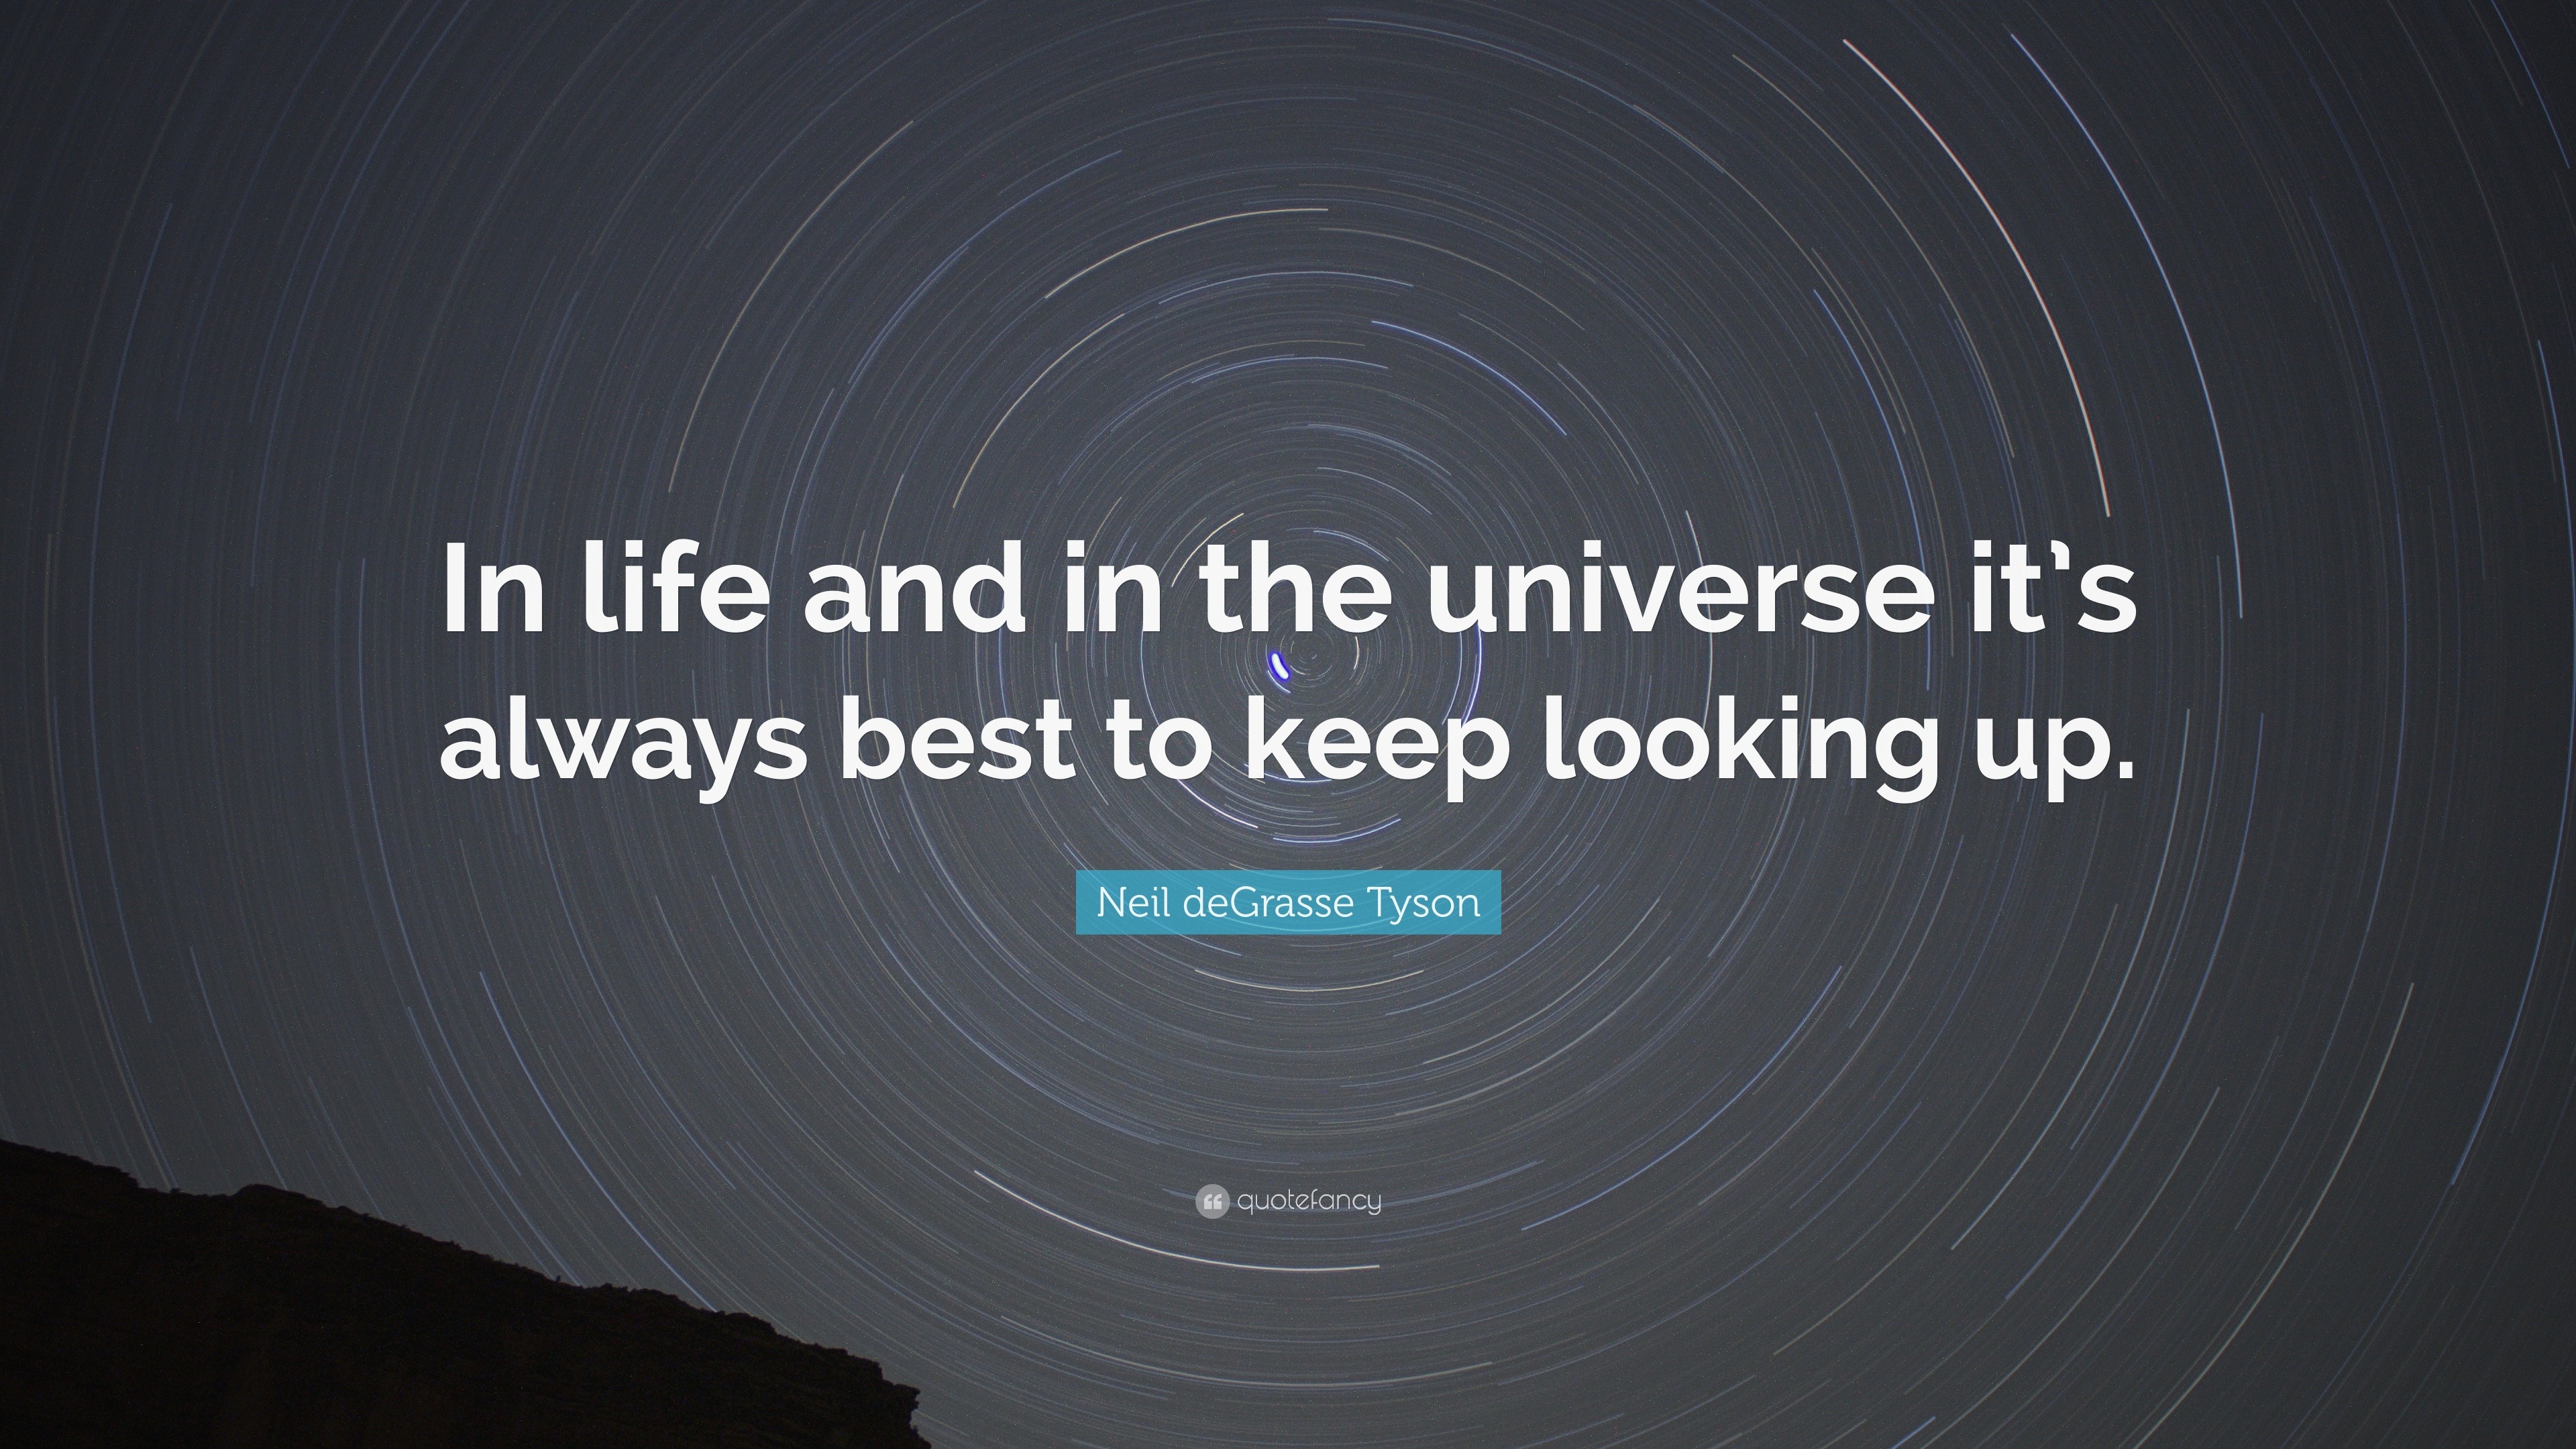 Neil Degrasse Tyson Quote In Life And In The Universe It S Always Best To Keep Looking